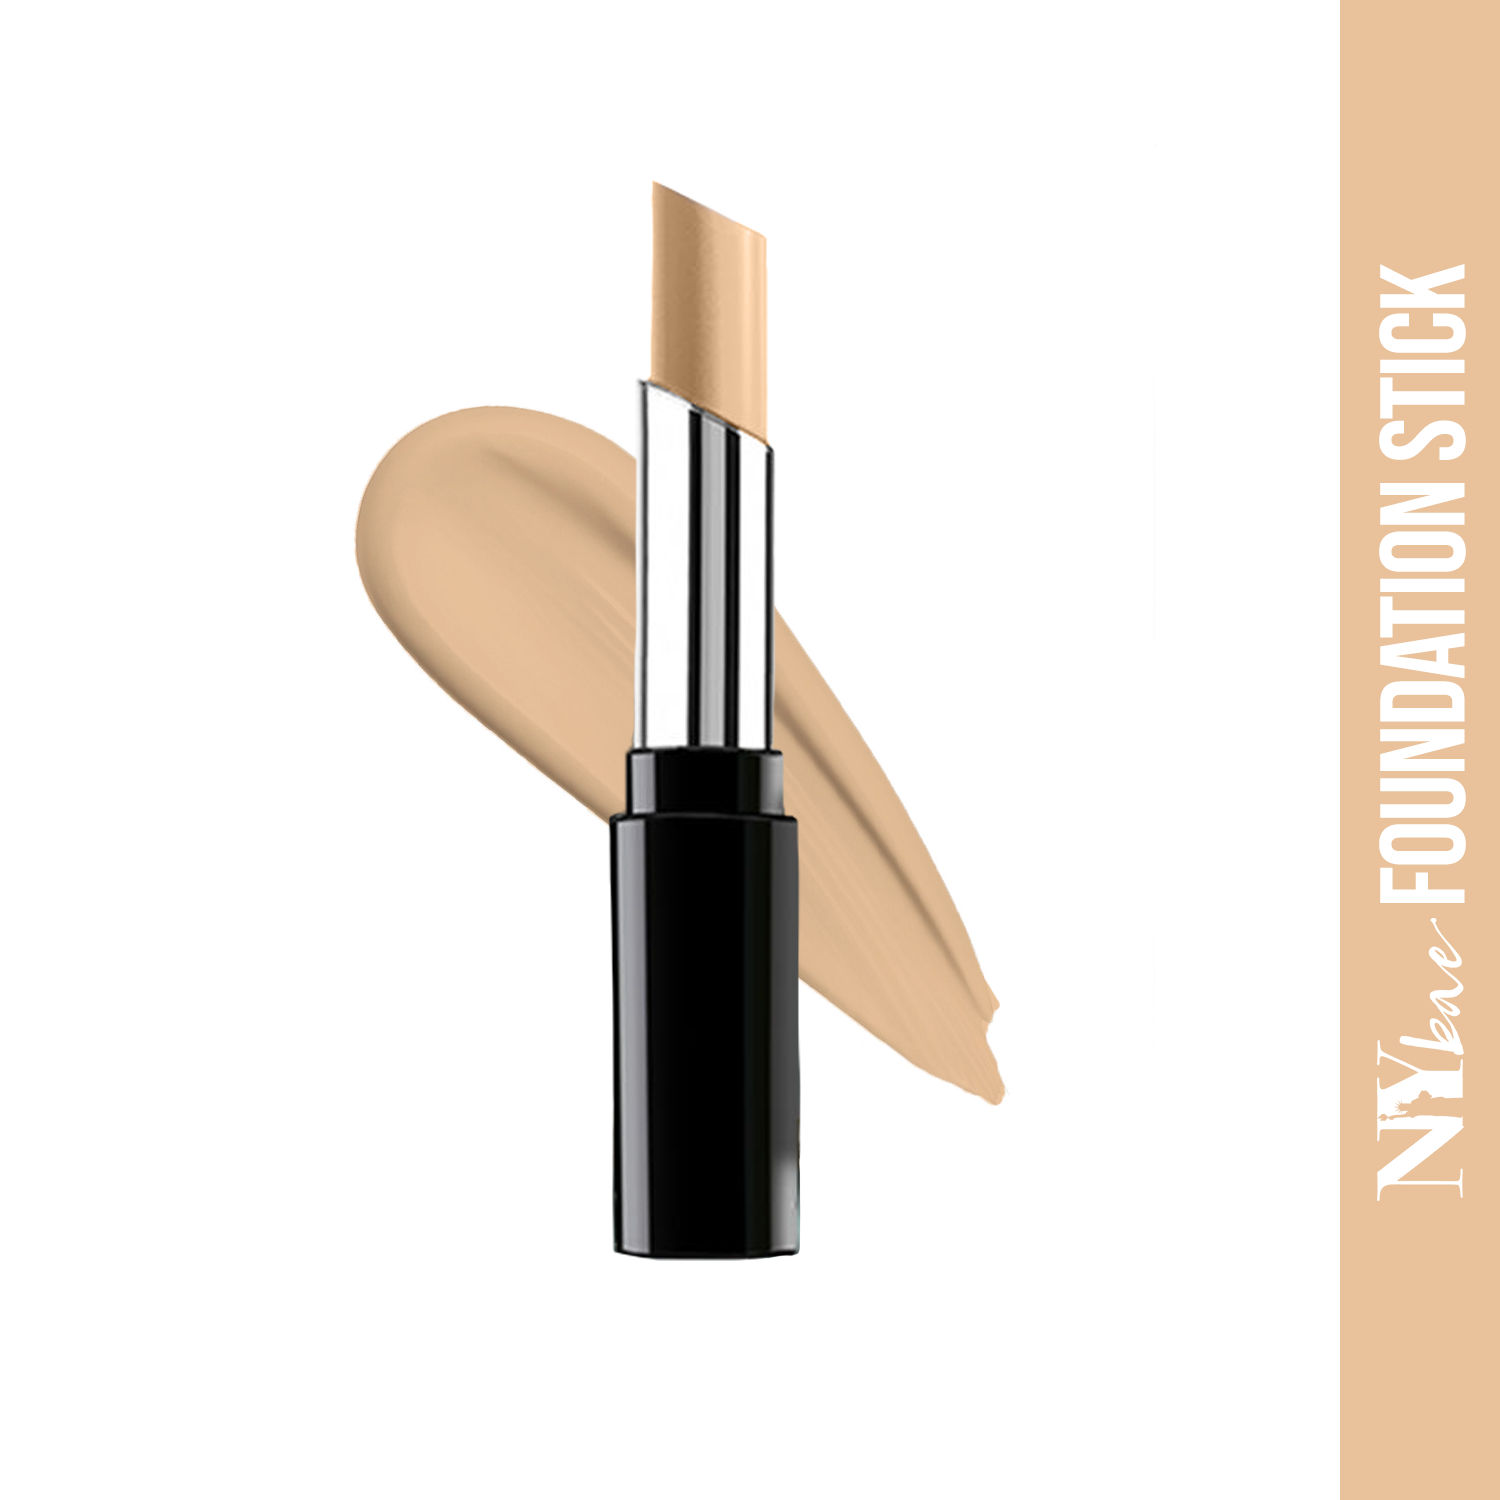 Buy NY Bae Runway Range Almond Oil Infused All In One Stick - Backstage Look In Warm Ivory 03 | Foundation Concealer Contour Colour Corrector | Fair & Wheatish Skin | Matte Finish | Enriched with Almond Oil | Covers Imperfections | Cruelty Free - Purplle